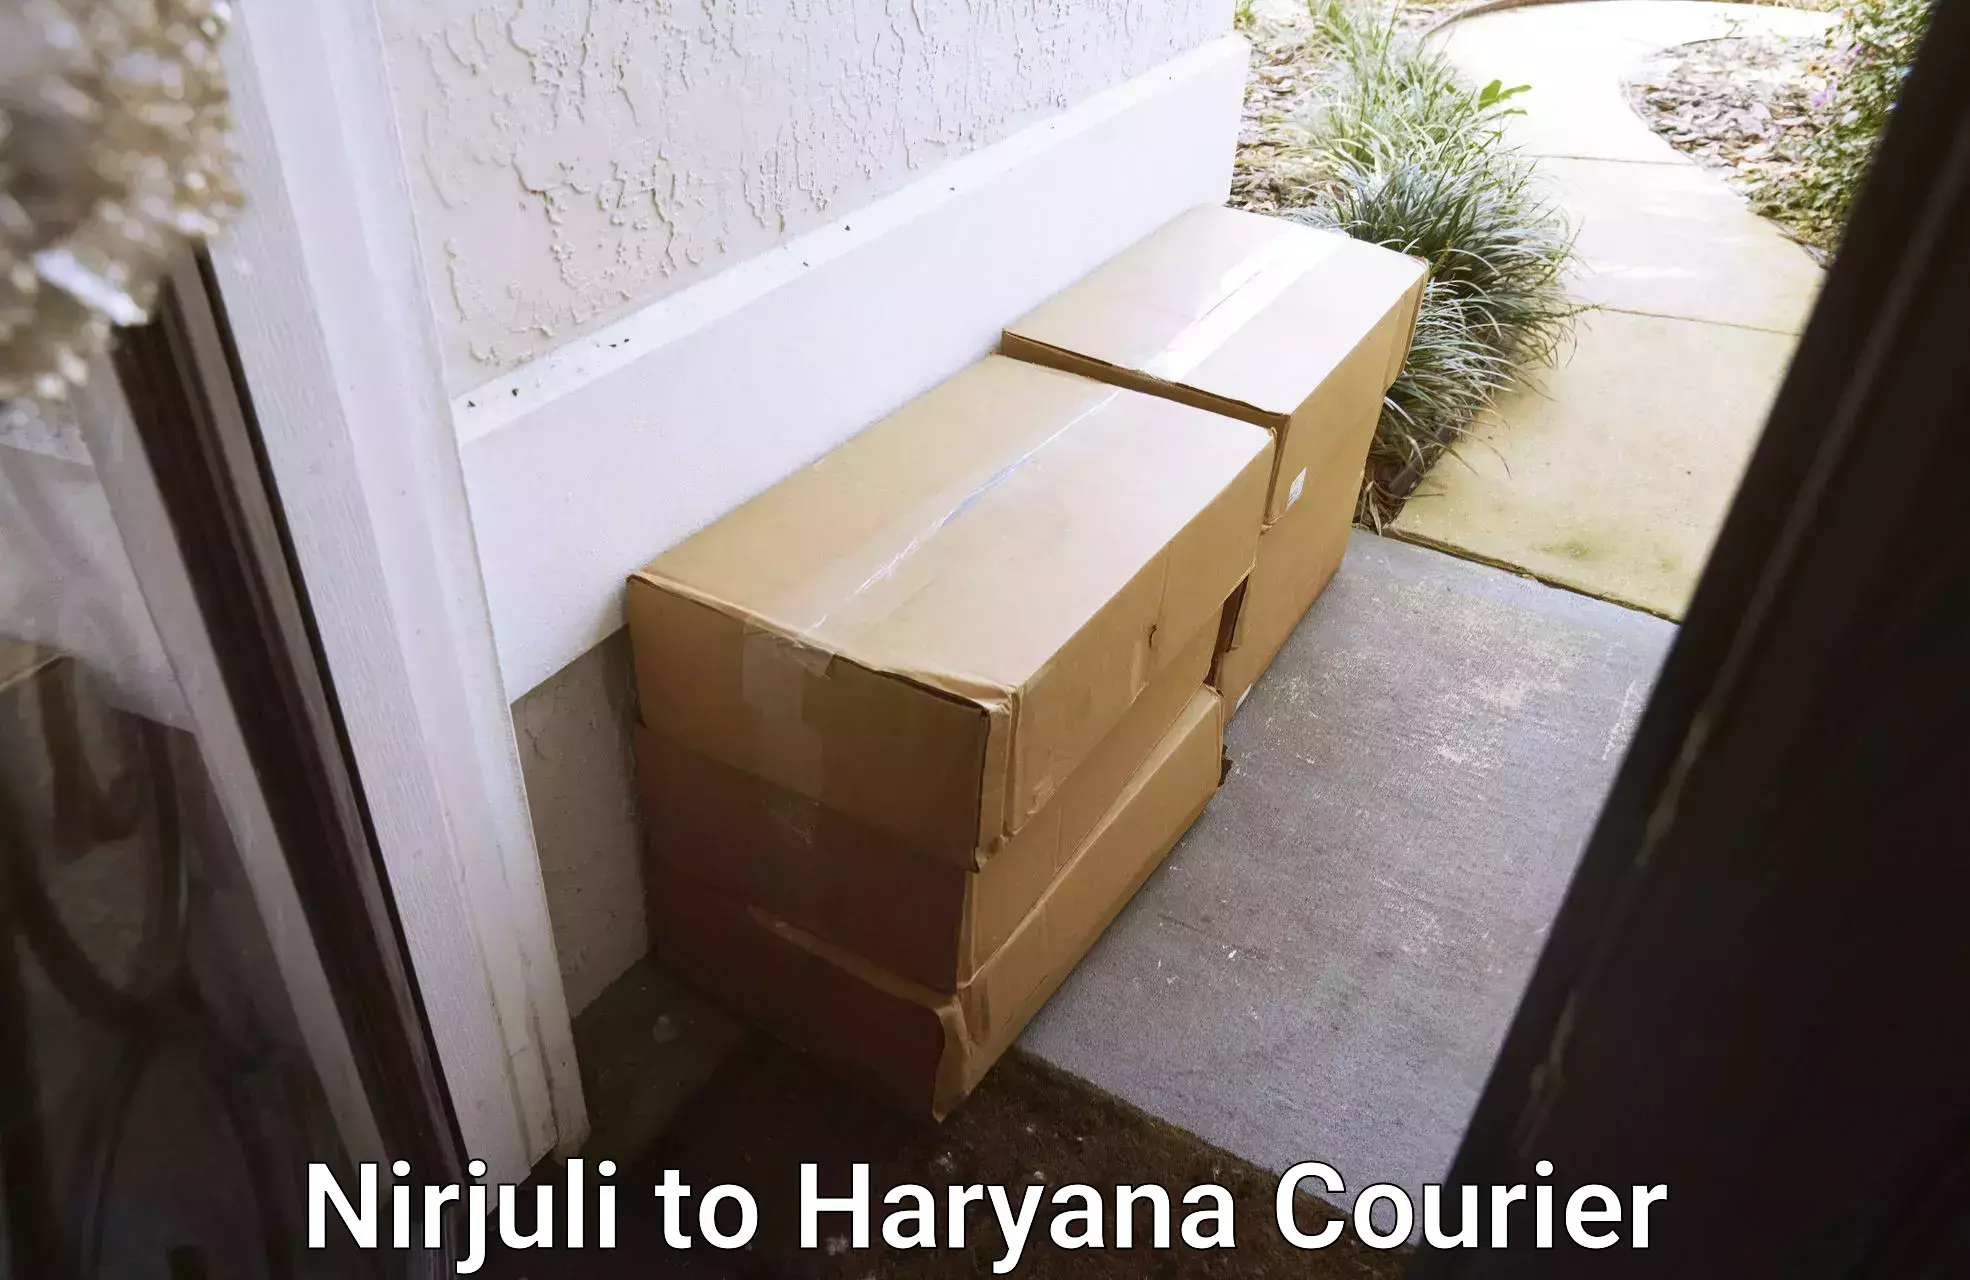 Tailored freight services Nirjuli to Gurgaon